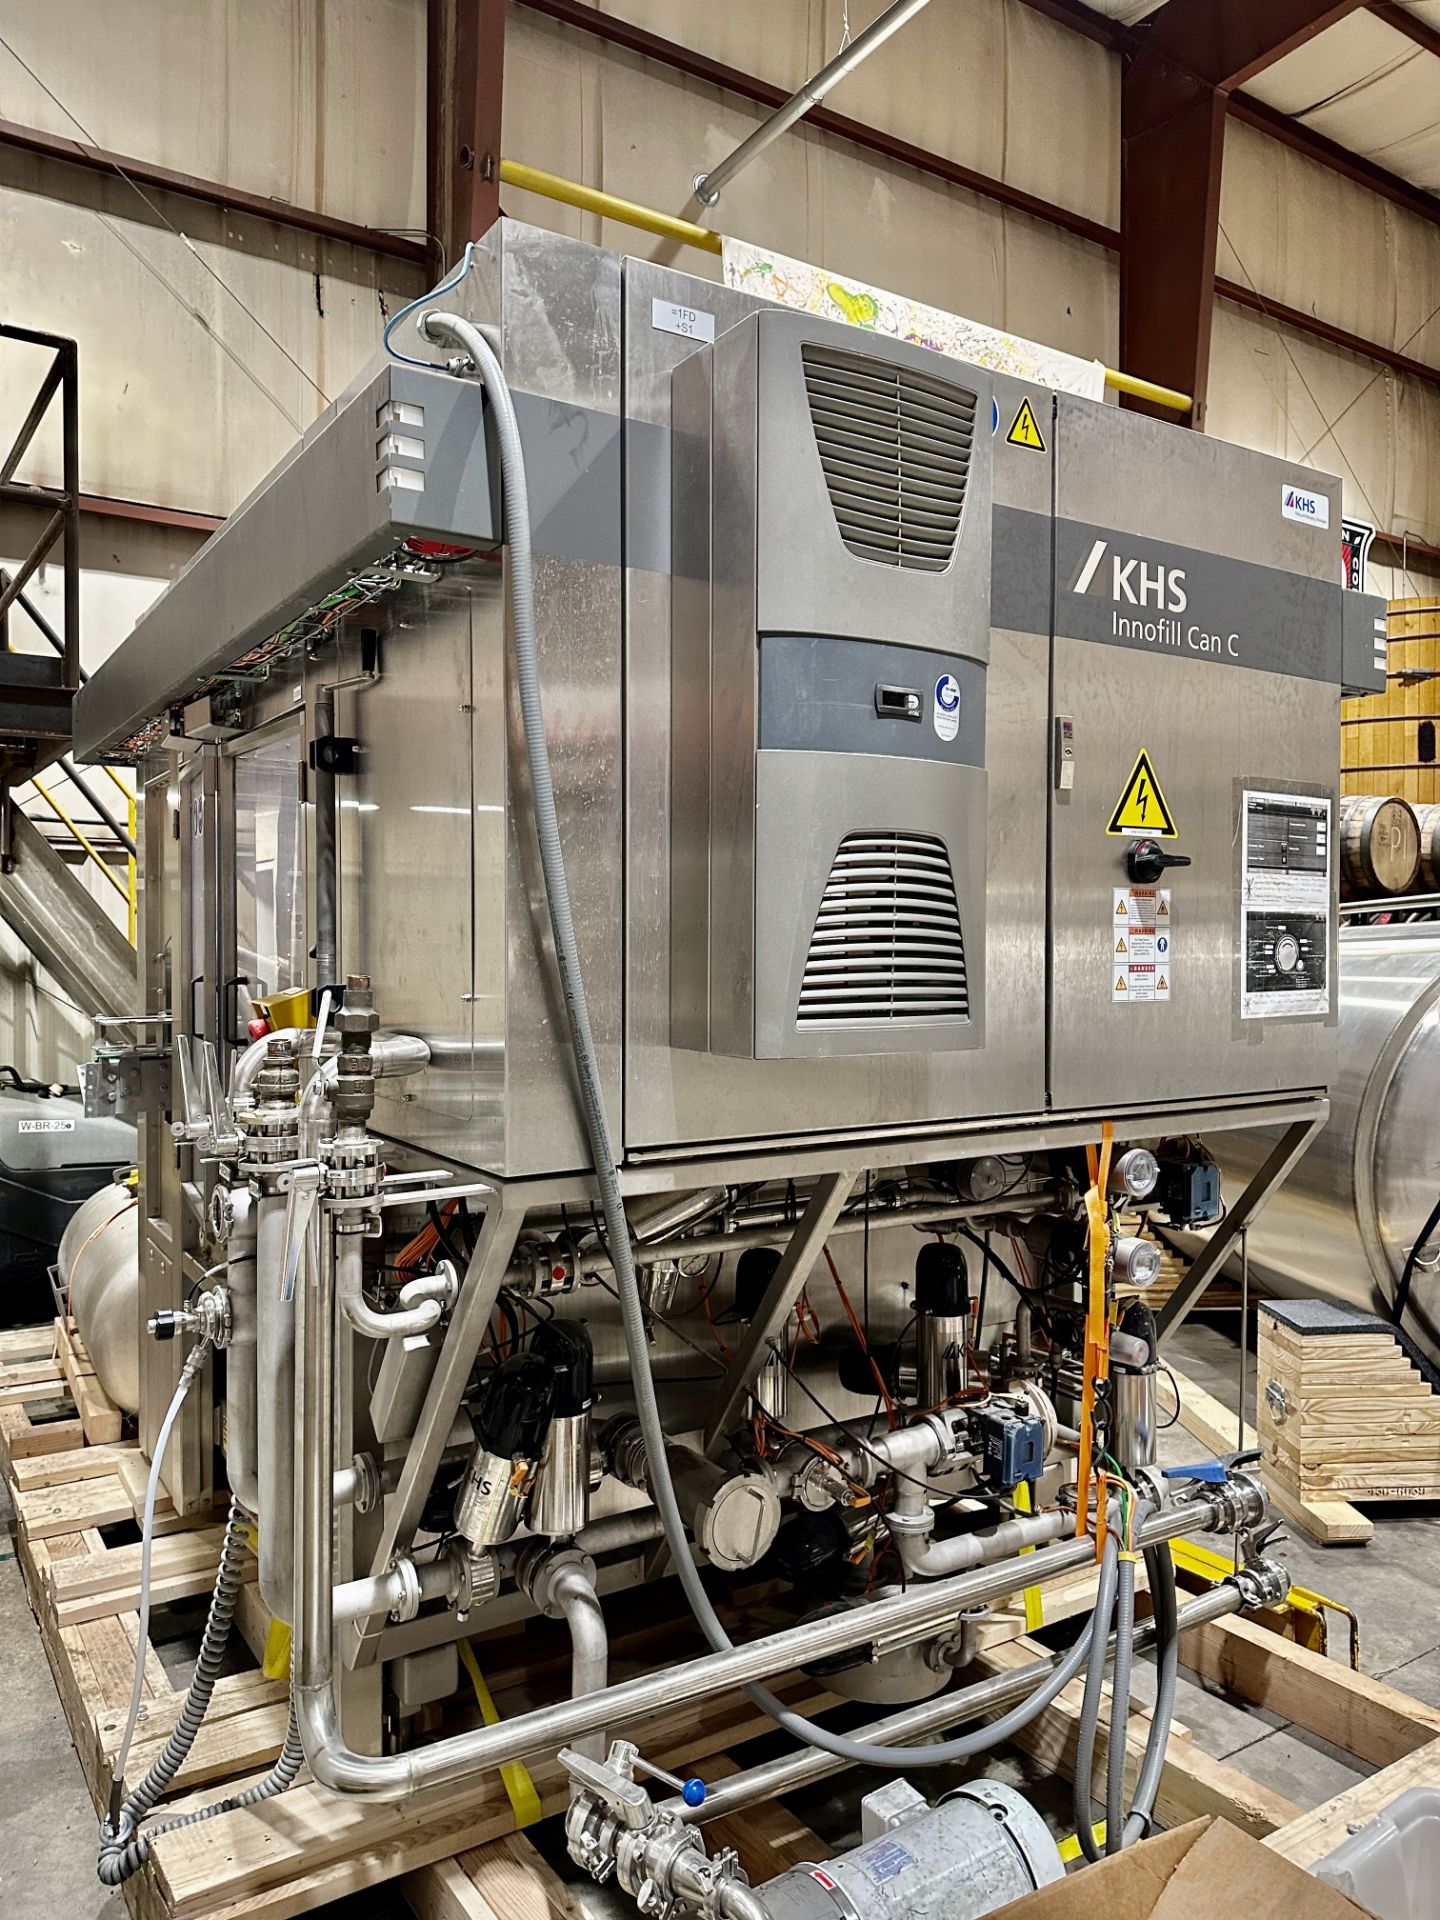 2019 KHS Innofill Can C Micro 18-Head Can Filler & 4-Head Seamer, Set for Sleek Cans, S/N: 10343324 - Image 5 of 21